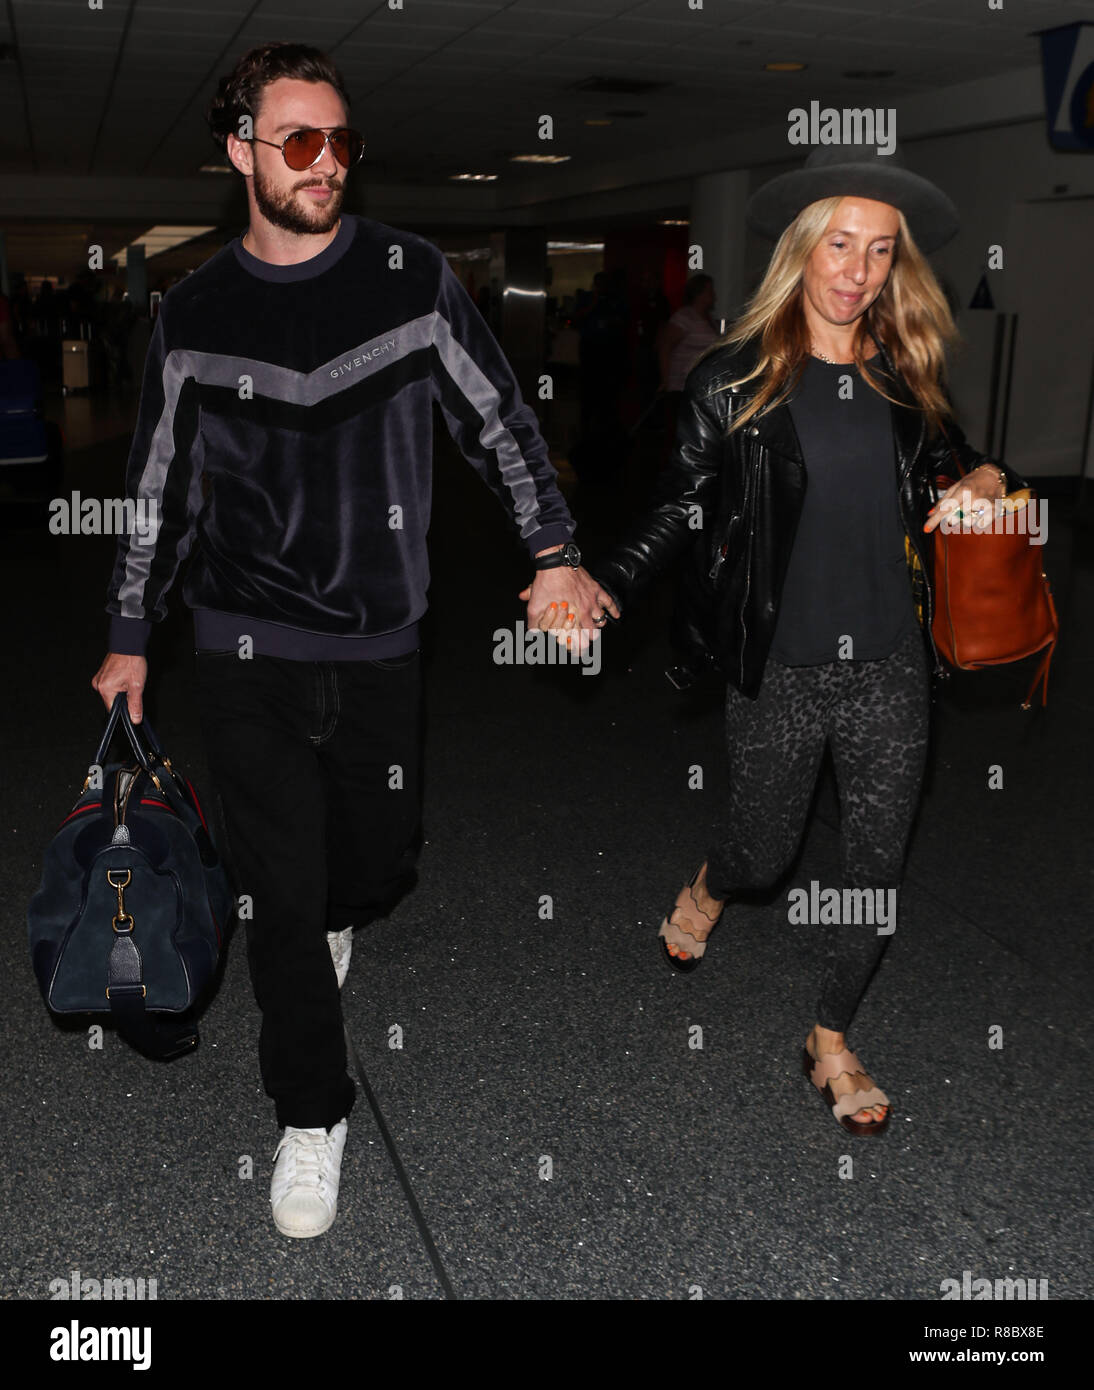 LOS ANGELES, CA, USA - SEPTEMBER 05: Aaron Taylor-Johnson and Sam Taylor-Johnson seen at Los Angeles International Airport (LAX) on September 5, 2018 in Los Angeles, California, United States. (Photo by Image Press Agency) Stock Photo